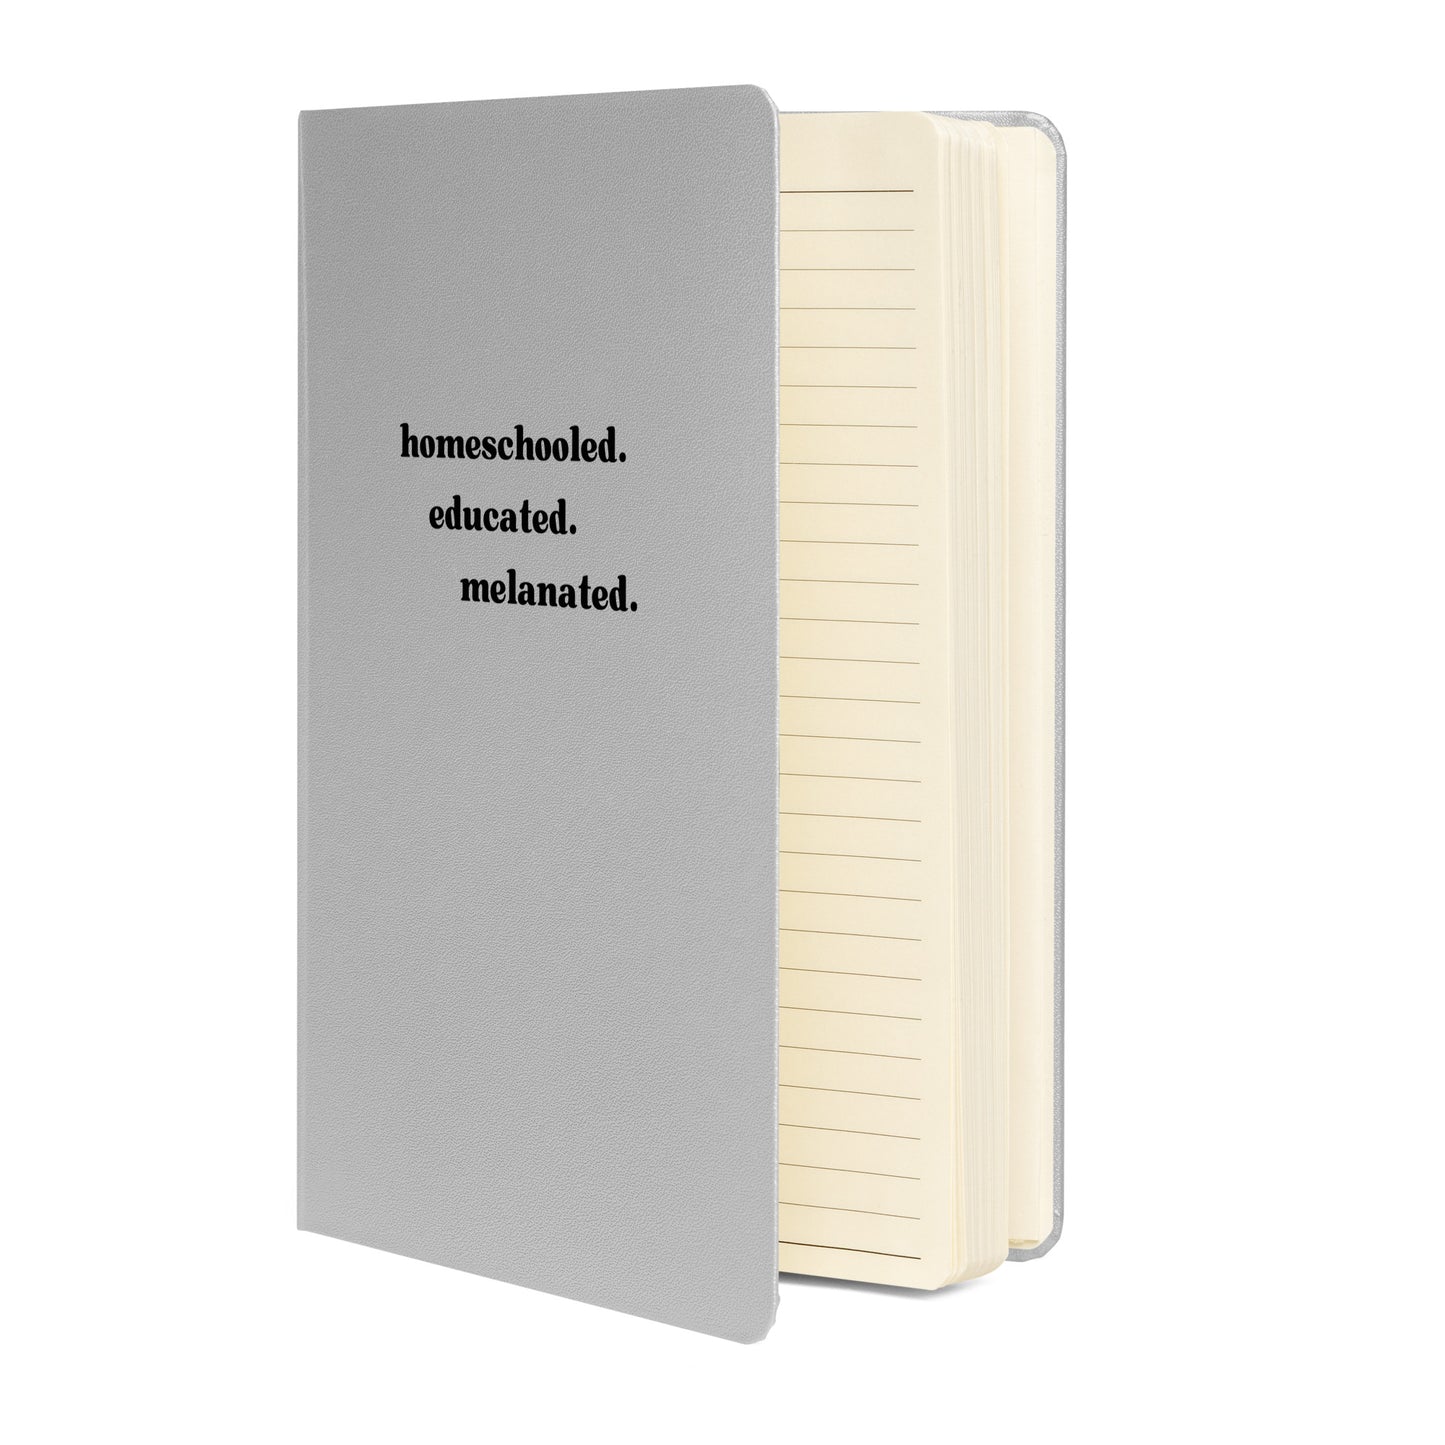 Gray Hardcover Journal | Homeschooled. Educated. Melanated.